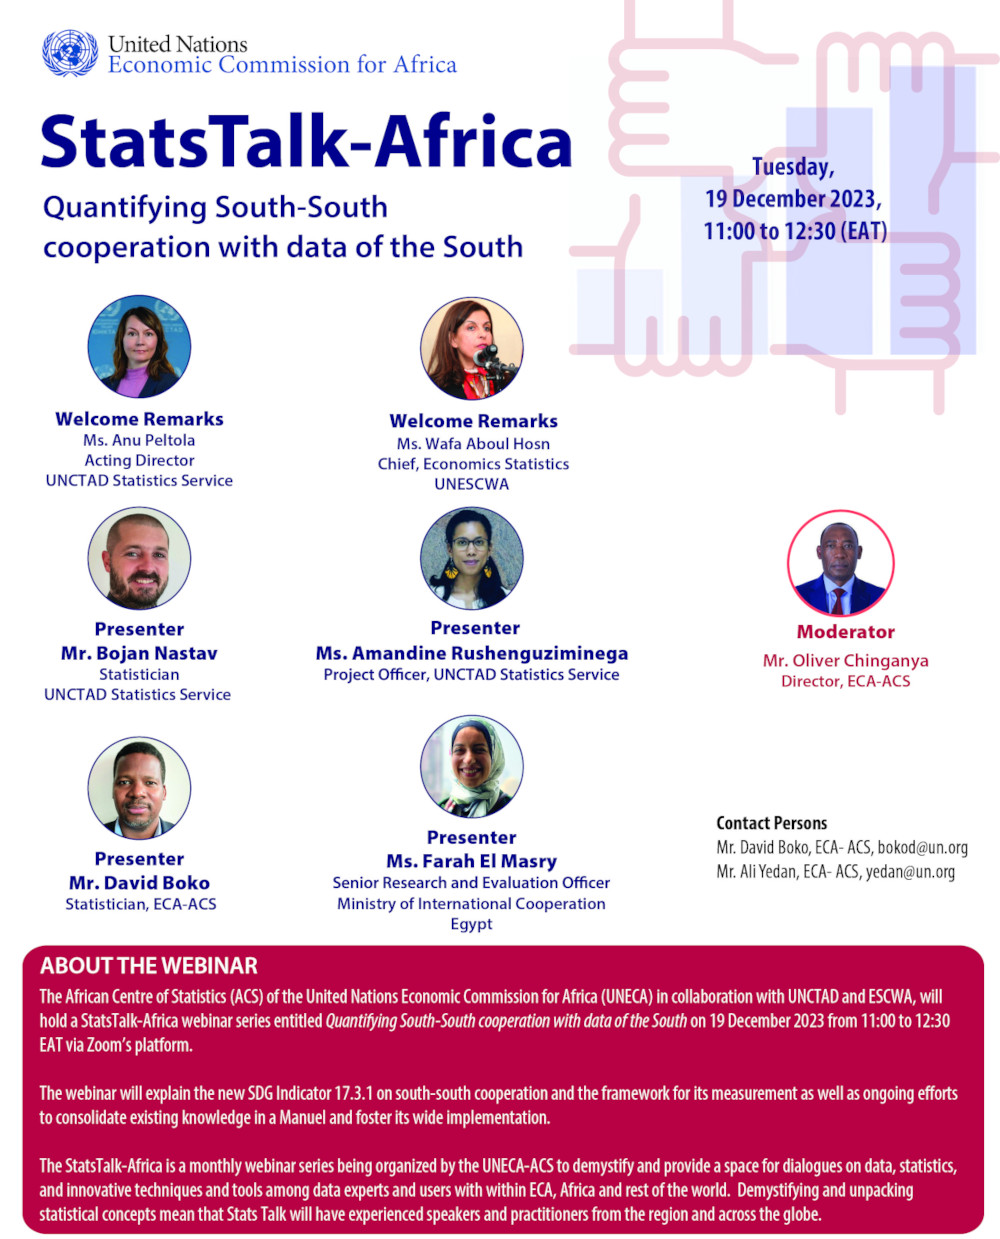 StatsTalk-Africa: Quantifying South-South cooperation with data of the South